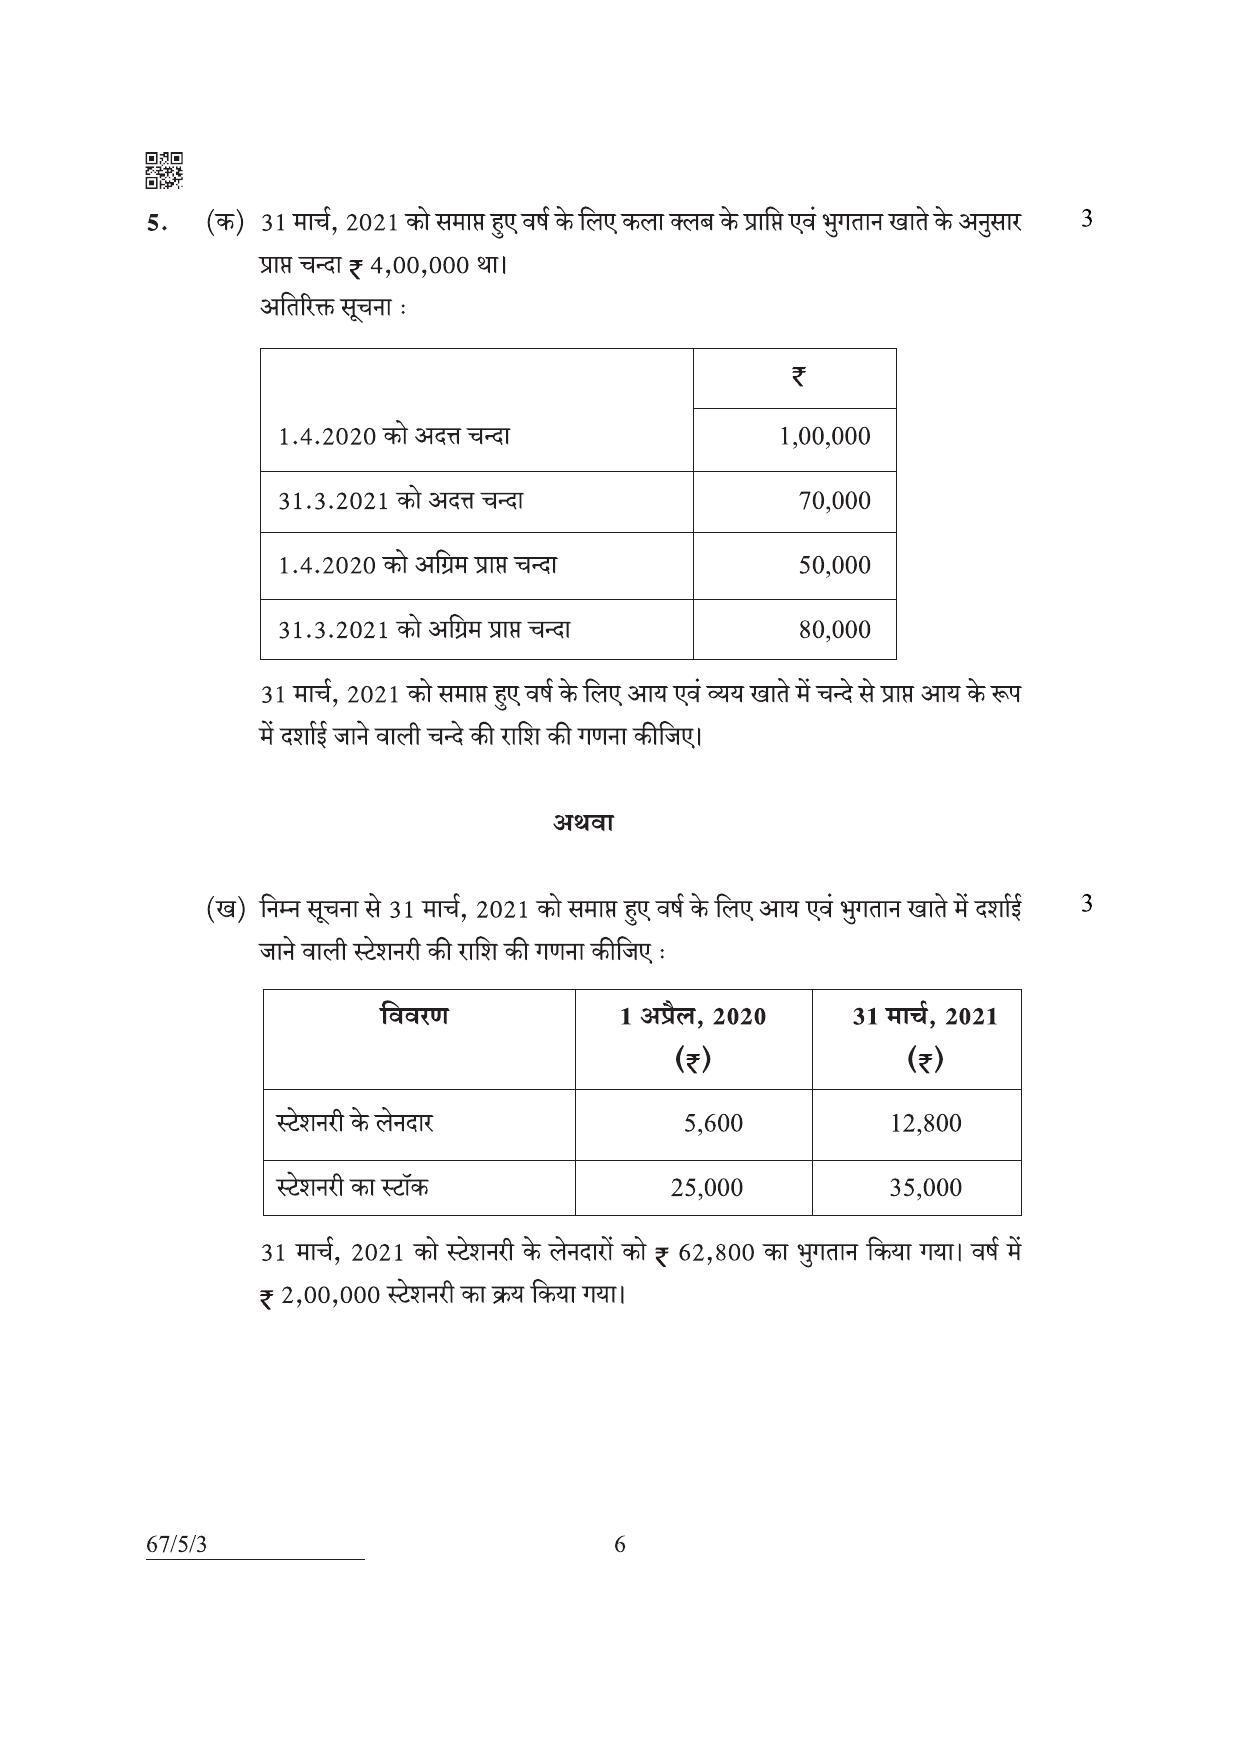 CBSE Class 12 67-5-3 Accountancy 2022 Question Paper - Page 6